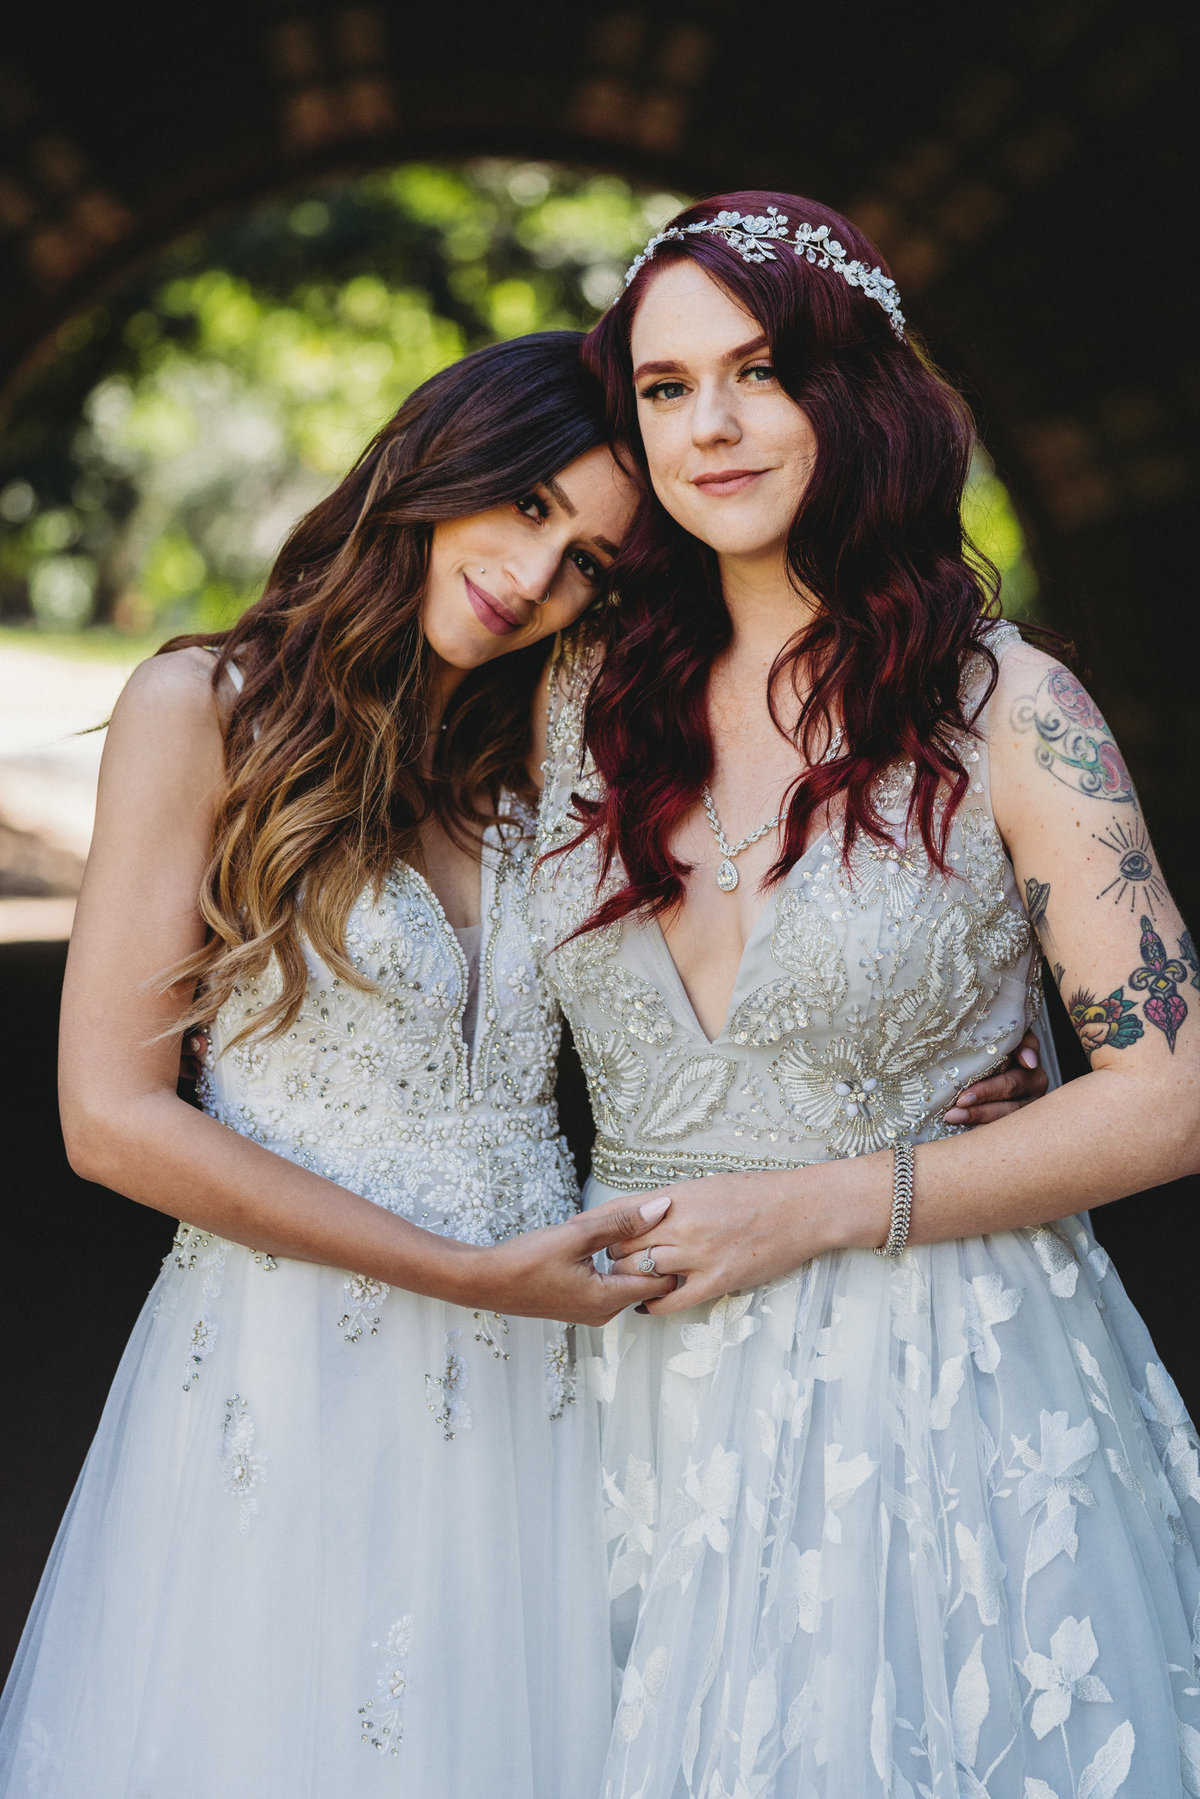 BRIDE AND BRIDE PORTRAIT PHOTOGRAPHY IN BROOKLYN